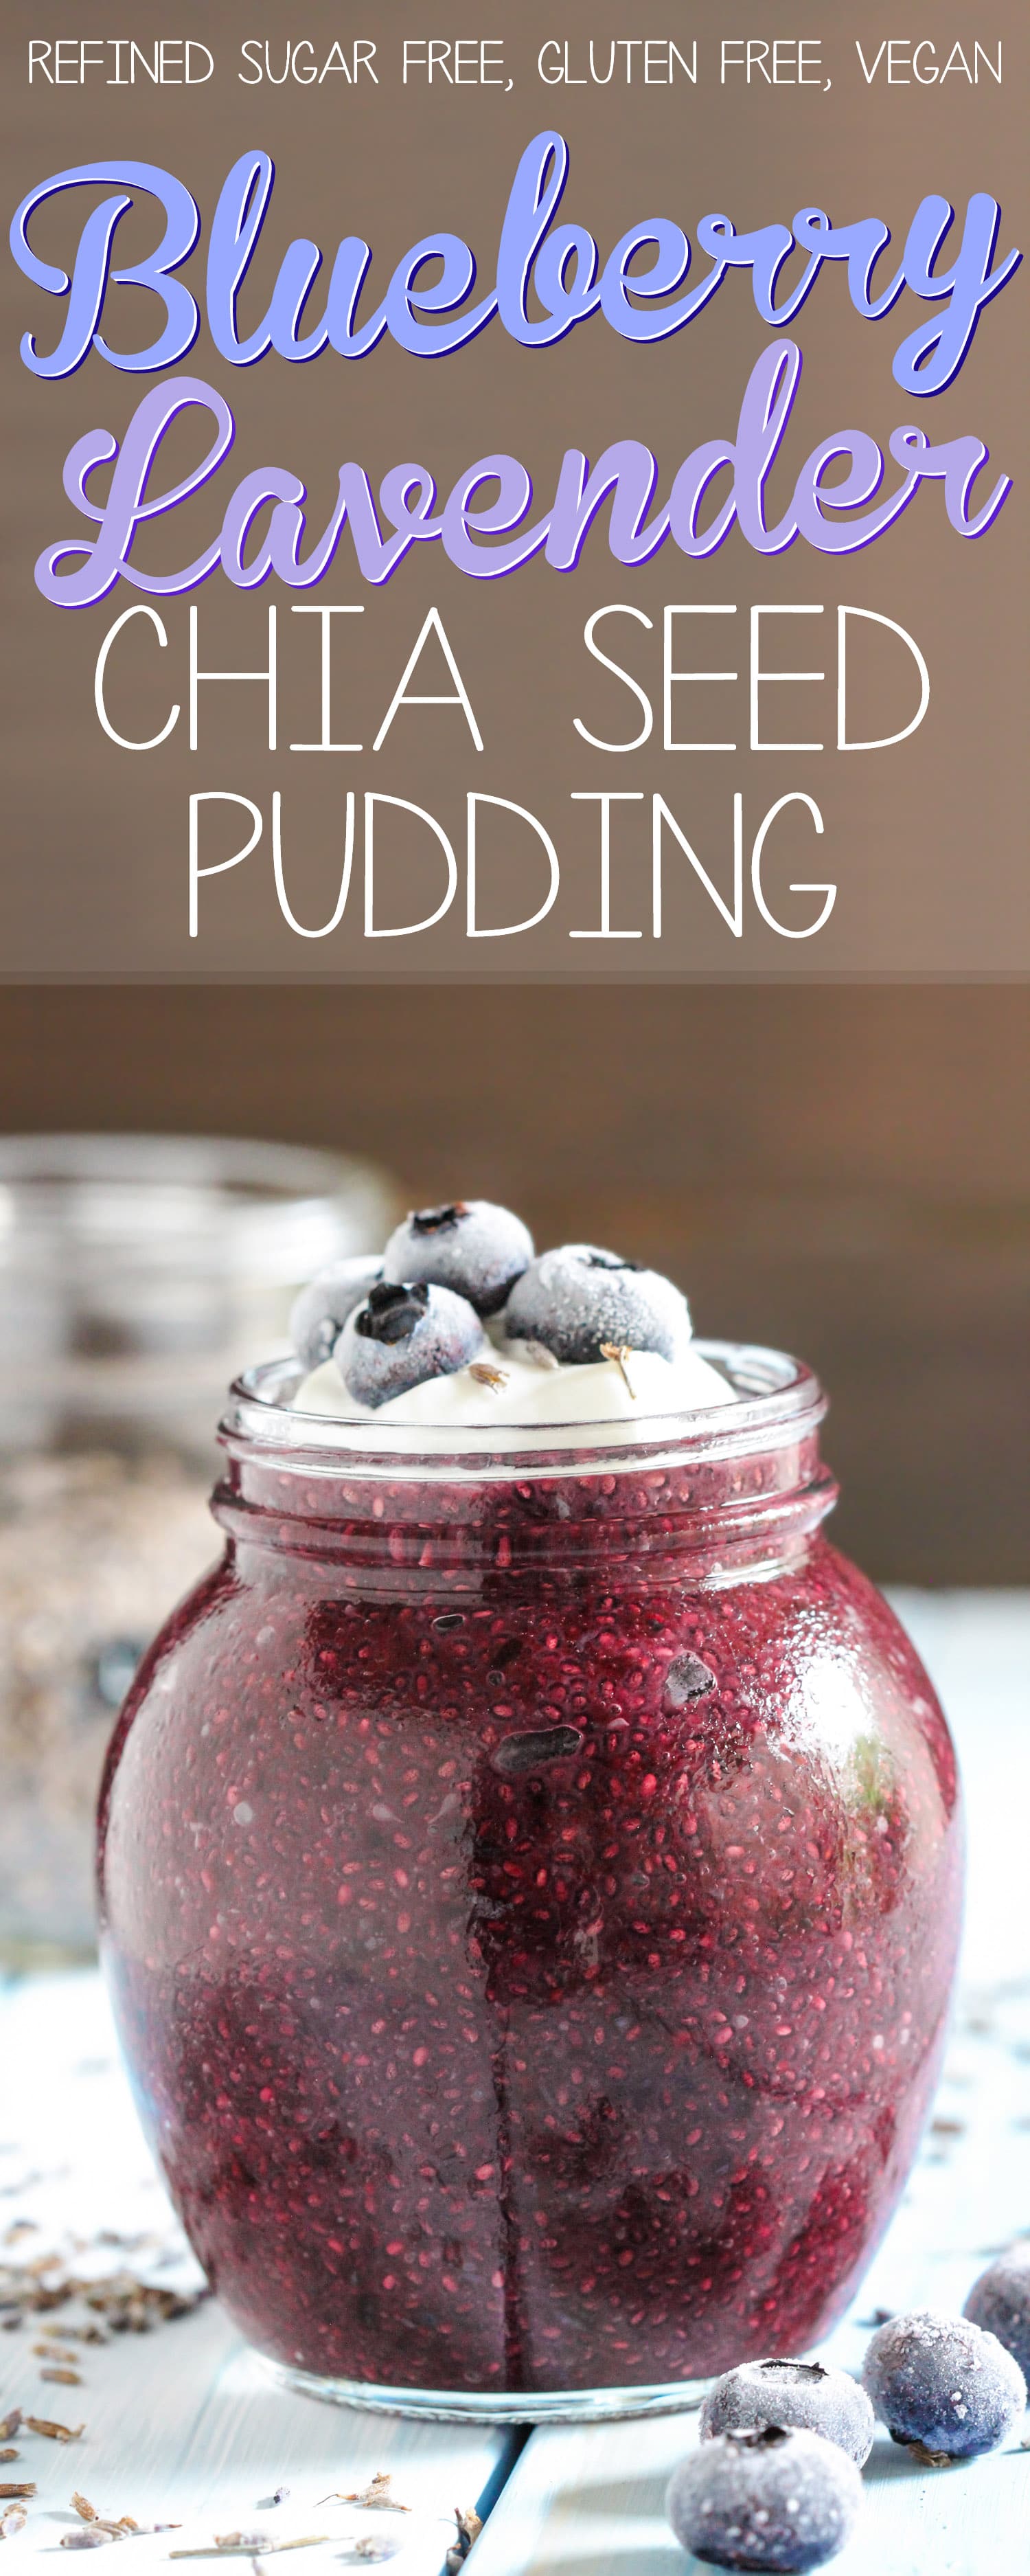 This Blueberry Lavender Chia Seed Pudding recipe is perfectly sweet and floral, and surprisingly filling! Makes for a great breakfast because it's full of healthy ingredients such as chia seeds (high in omega-3 fatty acids) and blueberries (high in antioxidants), and it also happens to be sugar free, high fiber, gluten free, and vegan too! Healthy Dessert Recipes at the Desserts With Benefits Blog (www.DessertsWithBenefits.com)